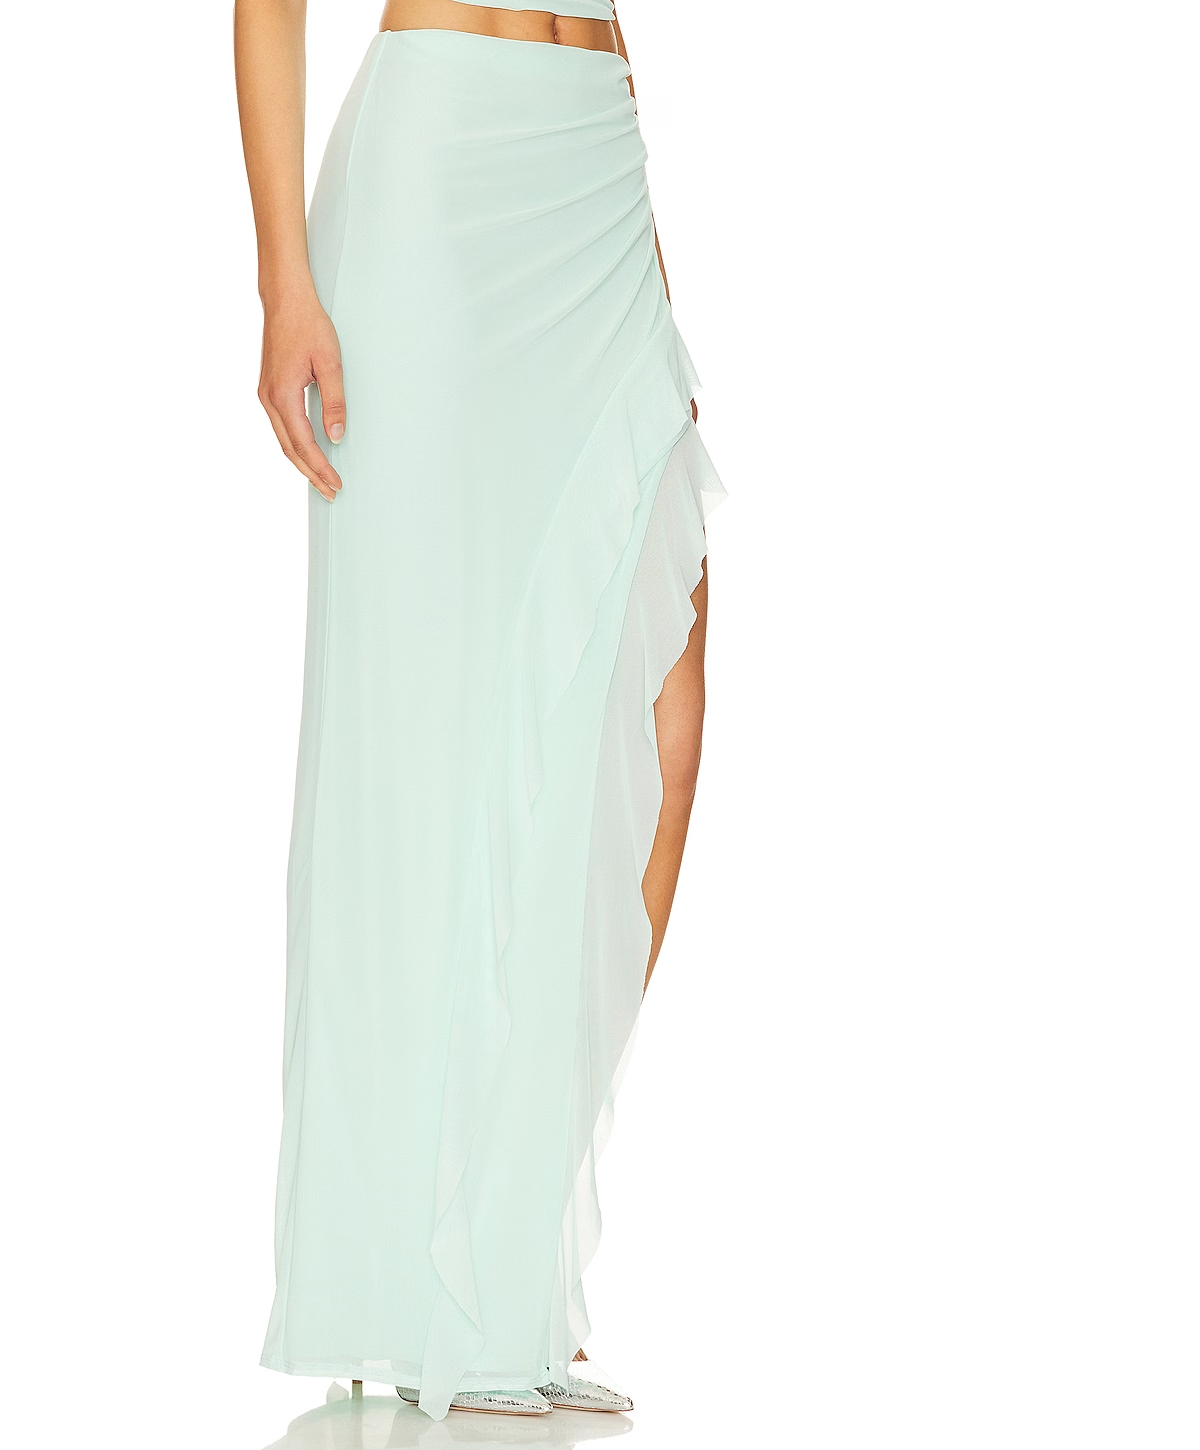 One Shoulder Top with High Low Skirt